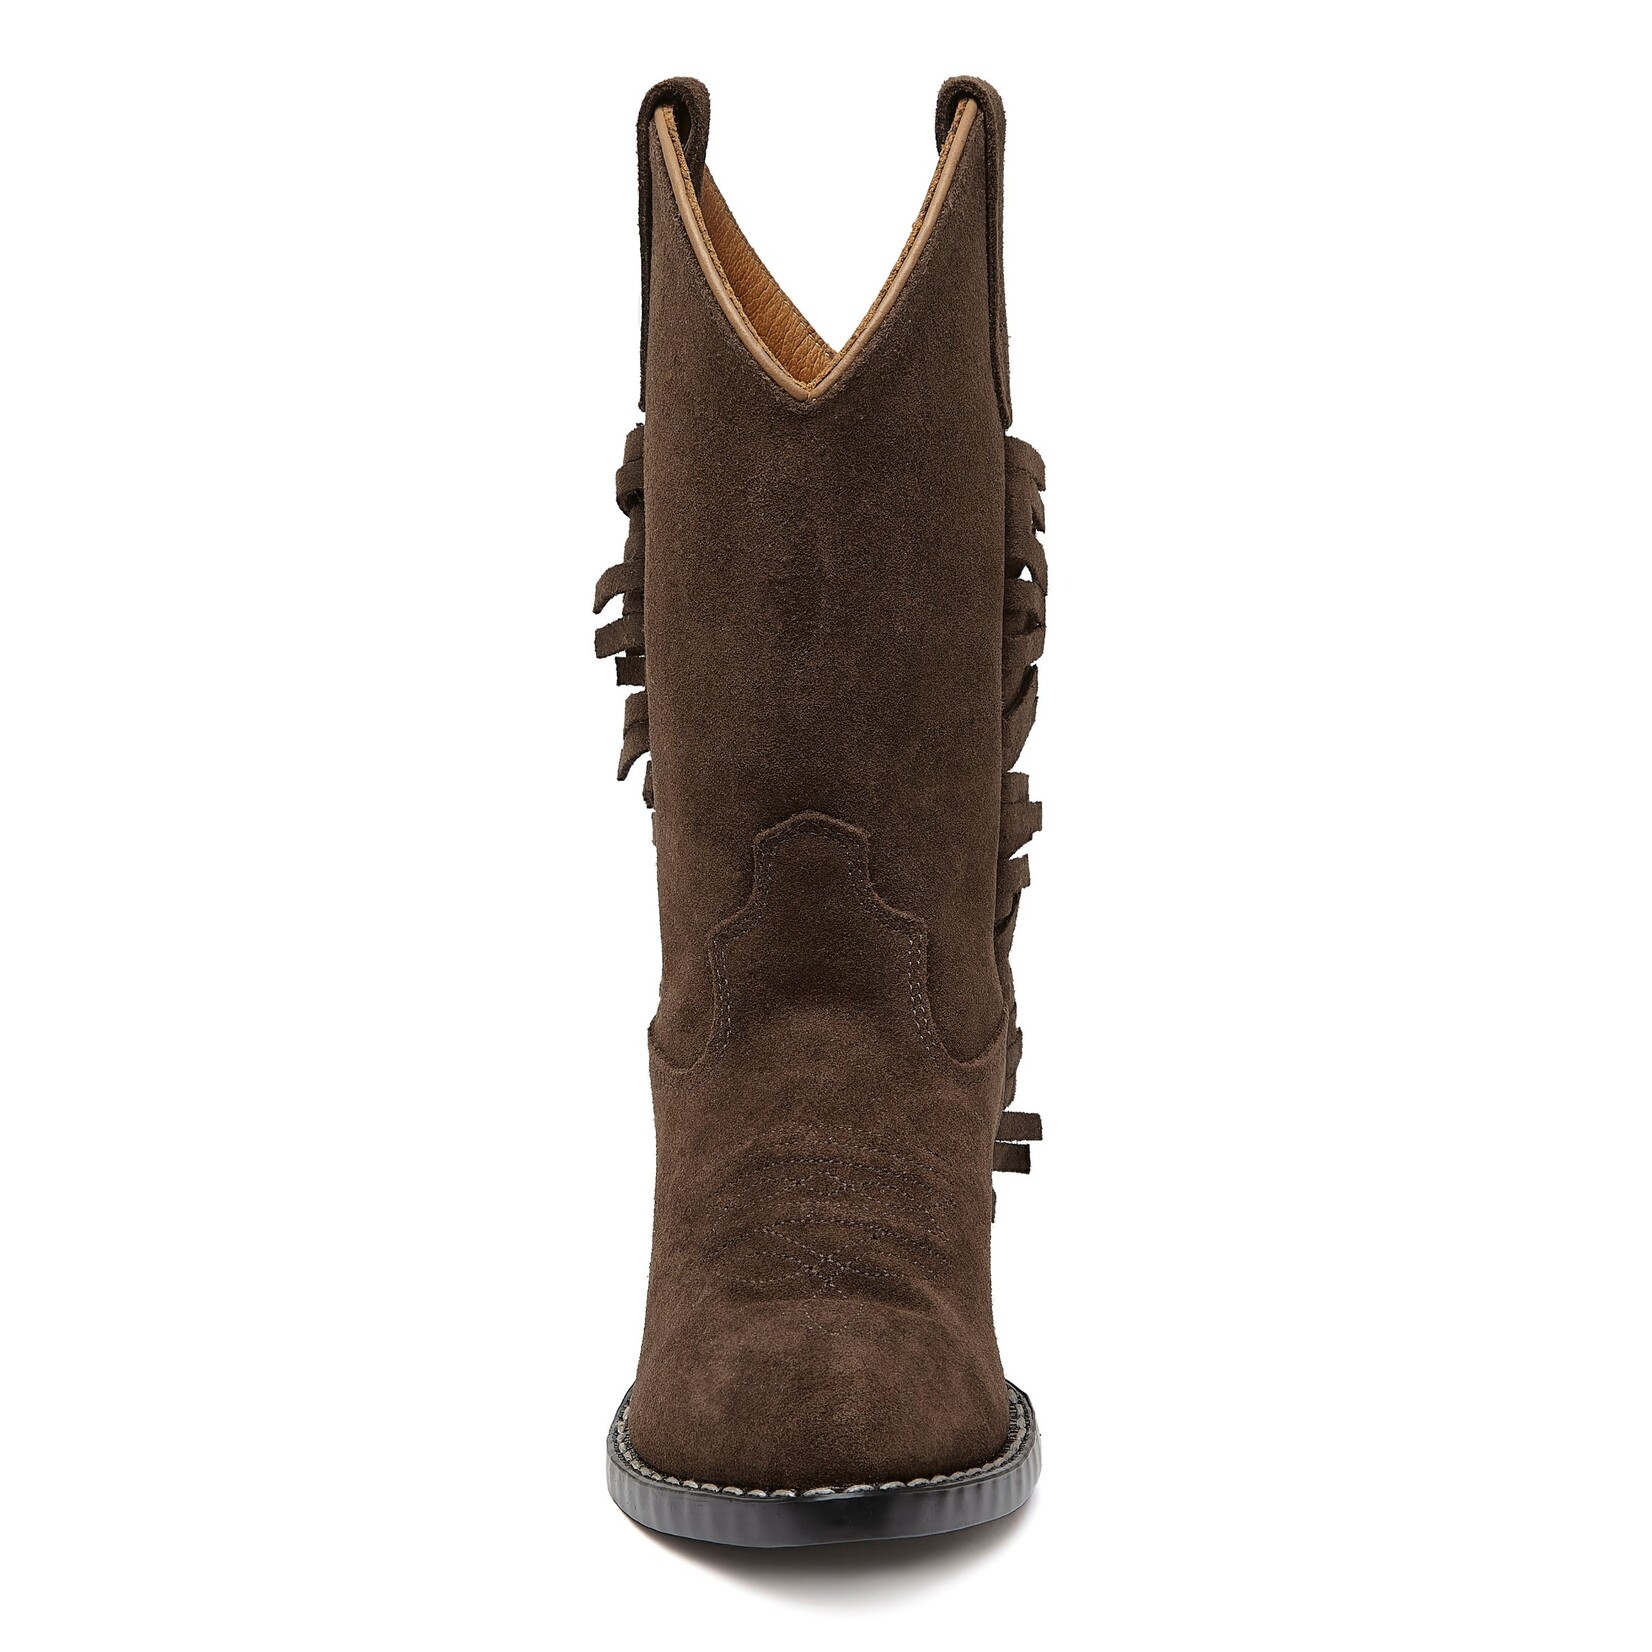 Bootstock Ruffle Boots - Brown